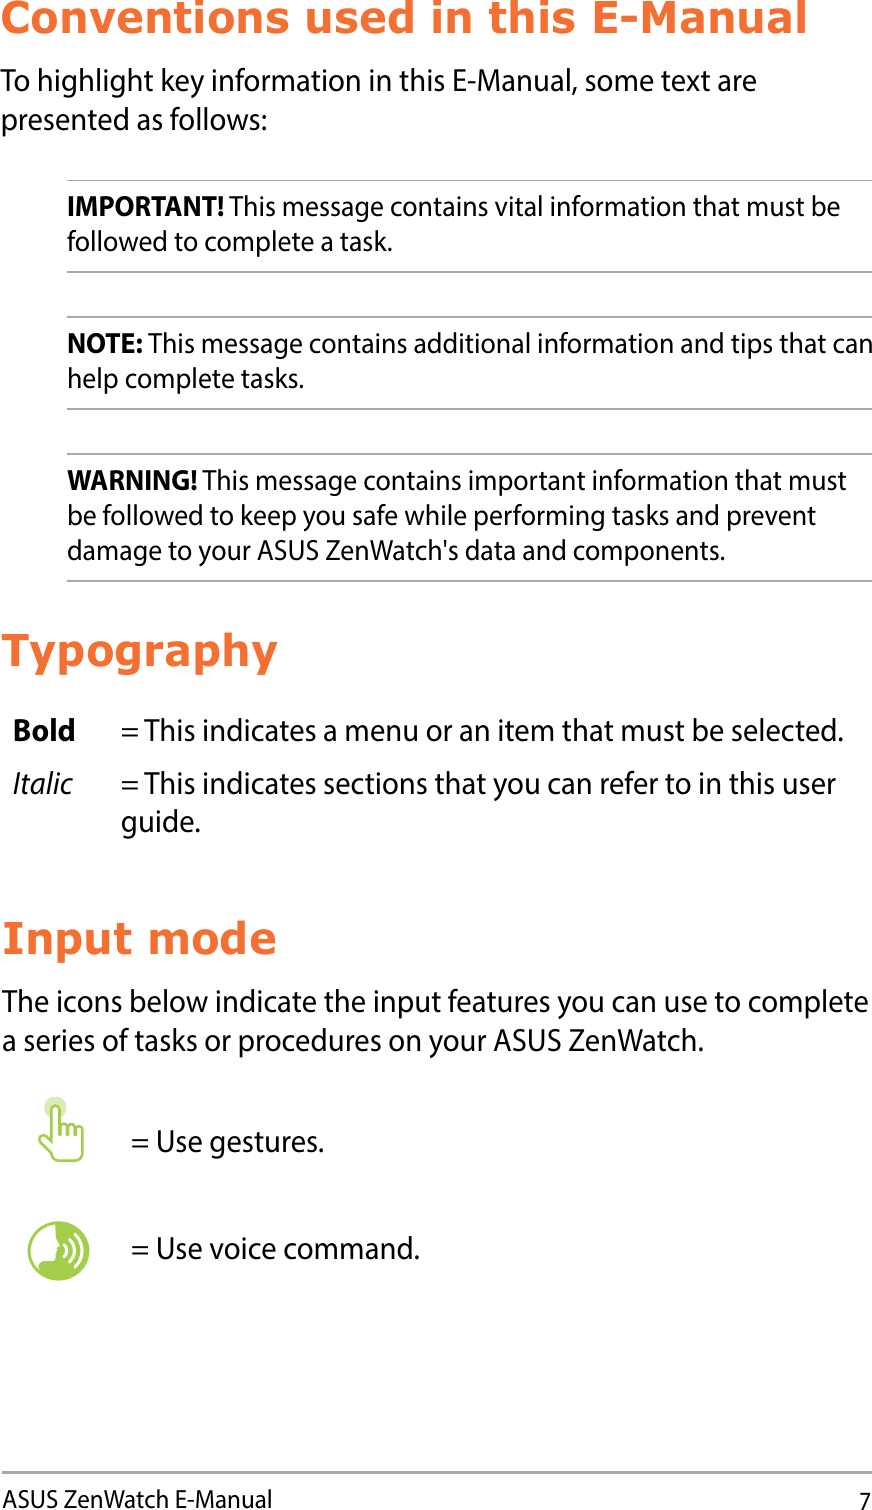 7ASUS ZenWatch E-ManualConventions used in this E-ManualTo highlight key information in this E-Manual, some text are presented as follows:IMPORTANT! This message contains vital information that must be followed to complete a task. NOTE: This message contains additional information and tips that can help complete tasks.WARNING! This message contains important information that must be followed to keep you safe while performing tasks and prevent damage to your ASUS ZenWatch&apos;s data and components.TypographyBold = This indicates a menu or an item that must be selected.Italic = This indicates sections that you can refer to in this user guide.Input modeThe icons below indicate the input features you can use to complete a series of tasks or procedures on your ASUS ZenWatch.= Use gestures.= Use voice command.